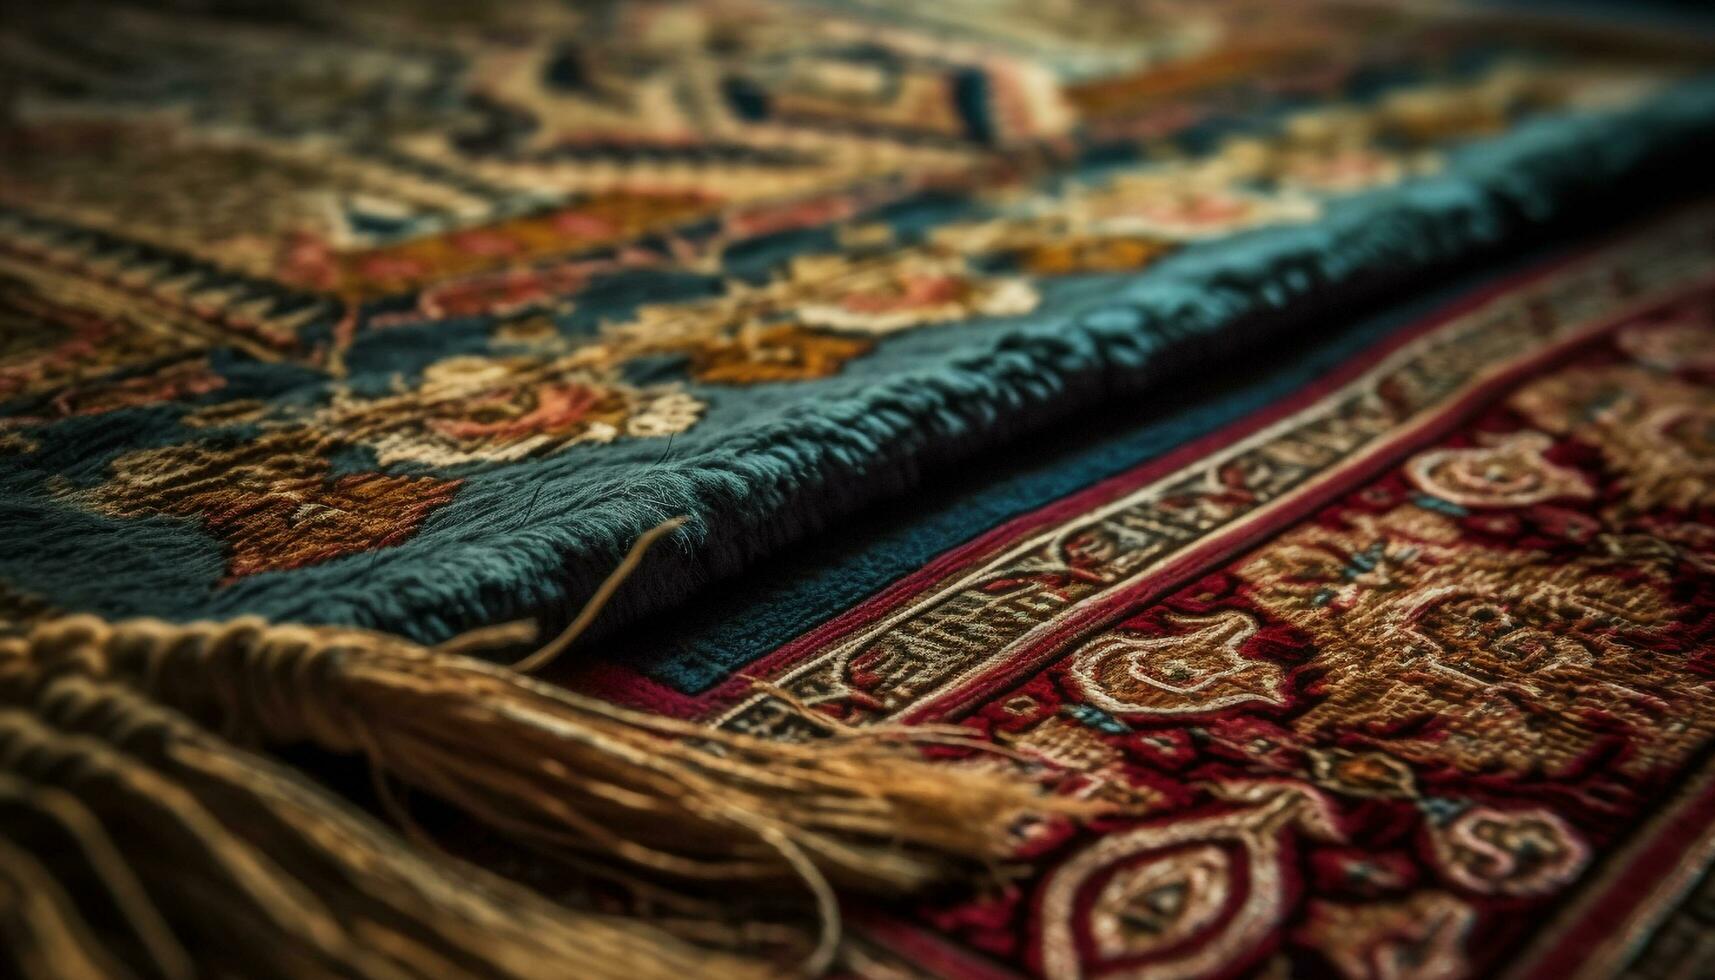 Turkish kilim rug a woven masterpiece of indigenous culture and craft generated by AI photo